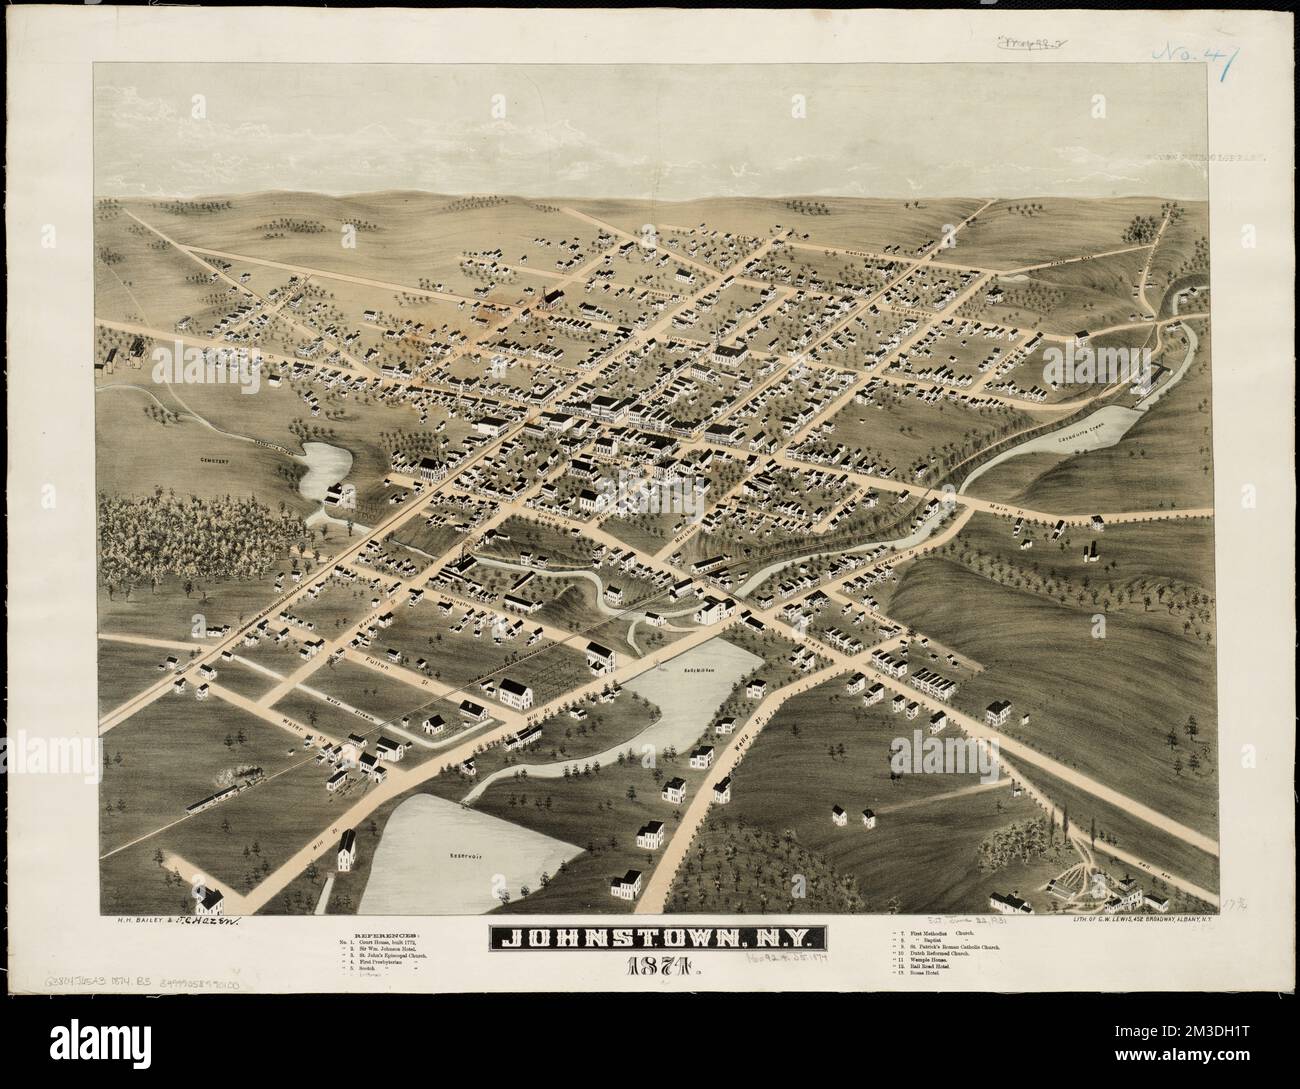 Johnstown, N.Y : 1874 , Johnstown N.Y., Aerial views Norman B. Leventhal Map Center Collection Stock Photo